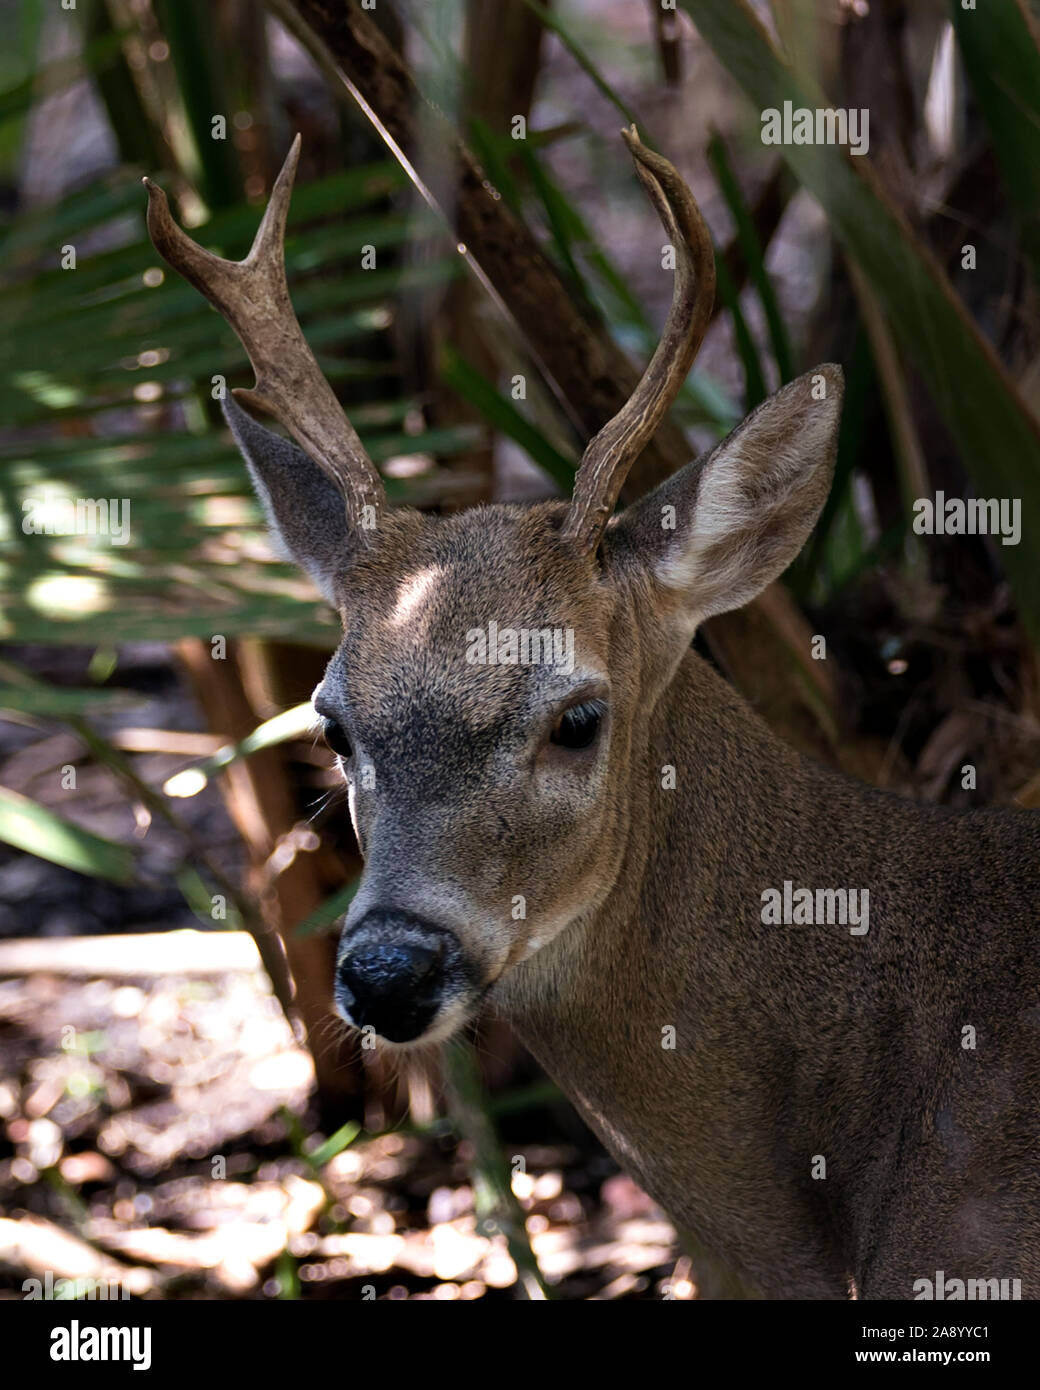 Deer (Florida Key Deer) close-up head view exposing its head, antlers, ears, eyes, nose, in its environment and surrounding. Stock Photo